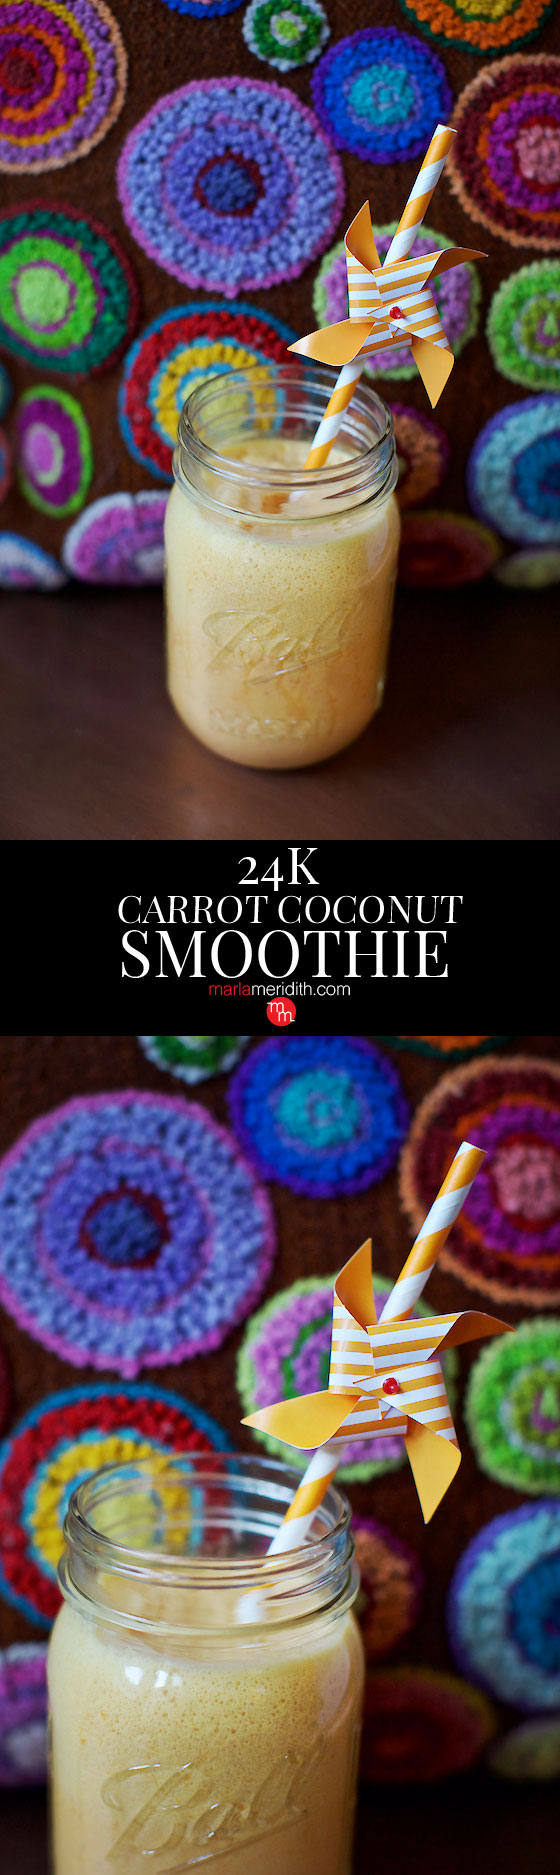 Start your day off right with our 24K Carrot Coconut Smoothie. So healthy & delicious! MarlaMeridith.com ( @marlameridith )